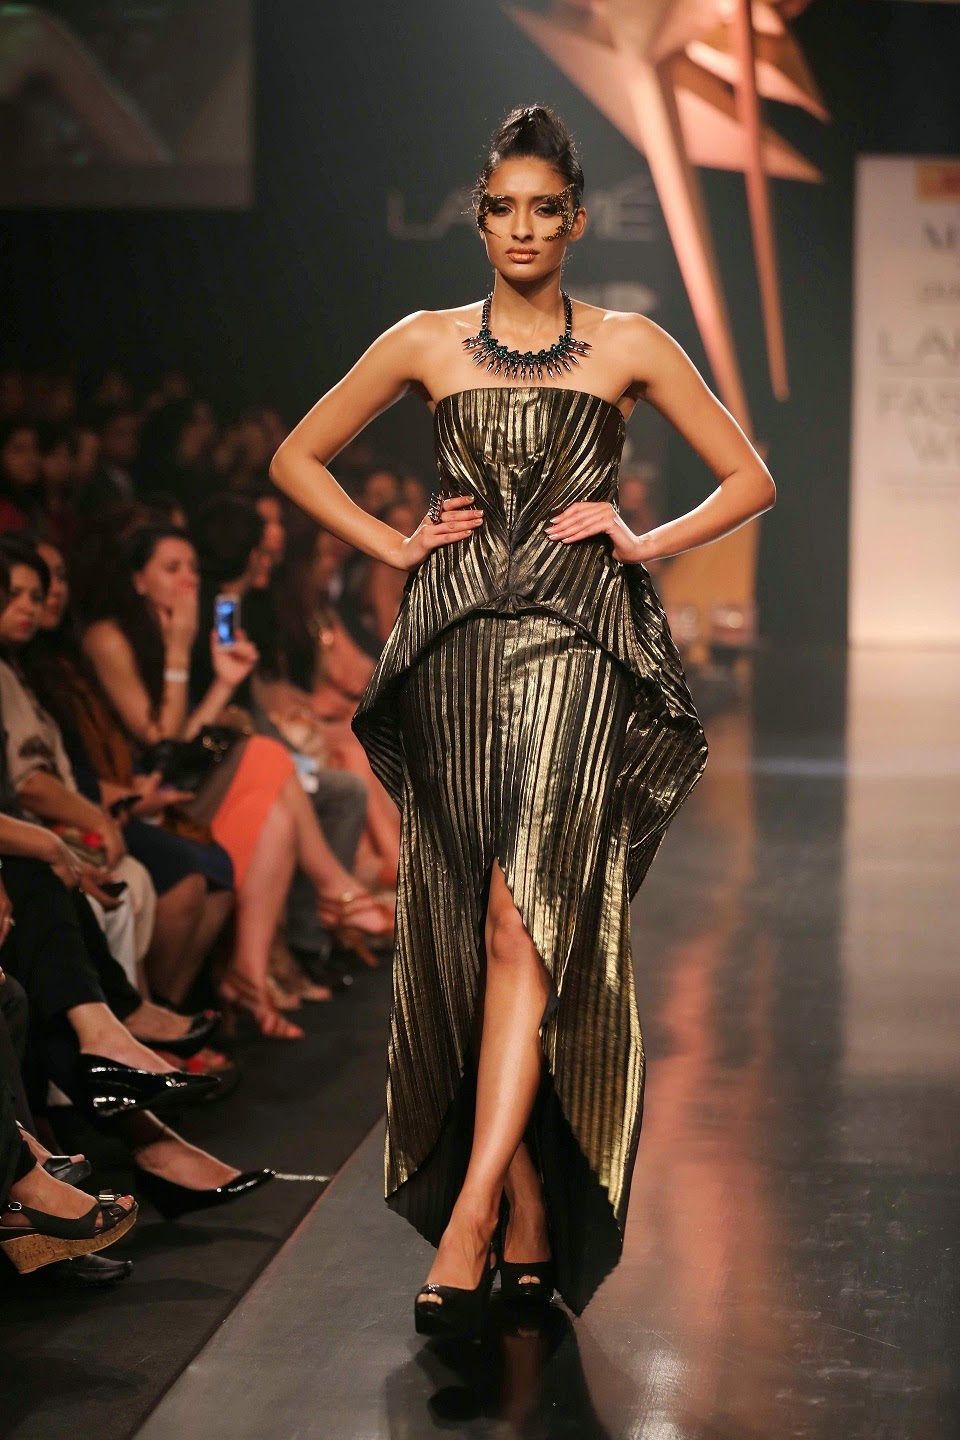 A Quaint Perspective: Lakme' Fashion Week Summer Resort 14 Day 2 Part 3